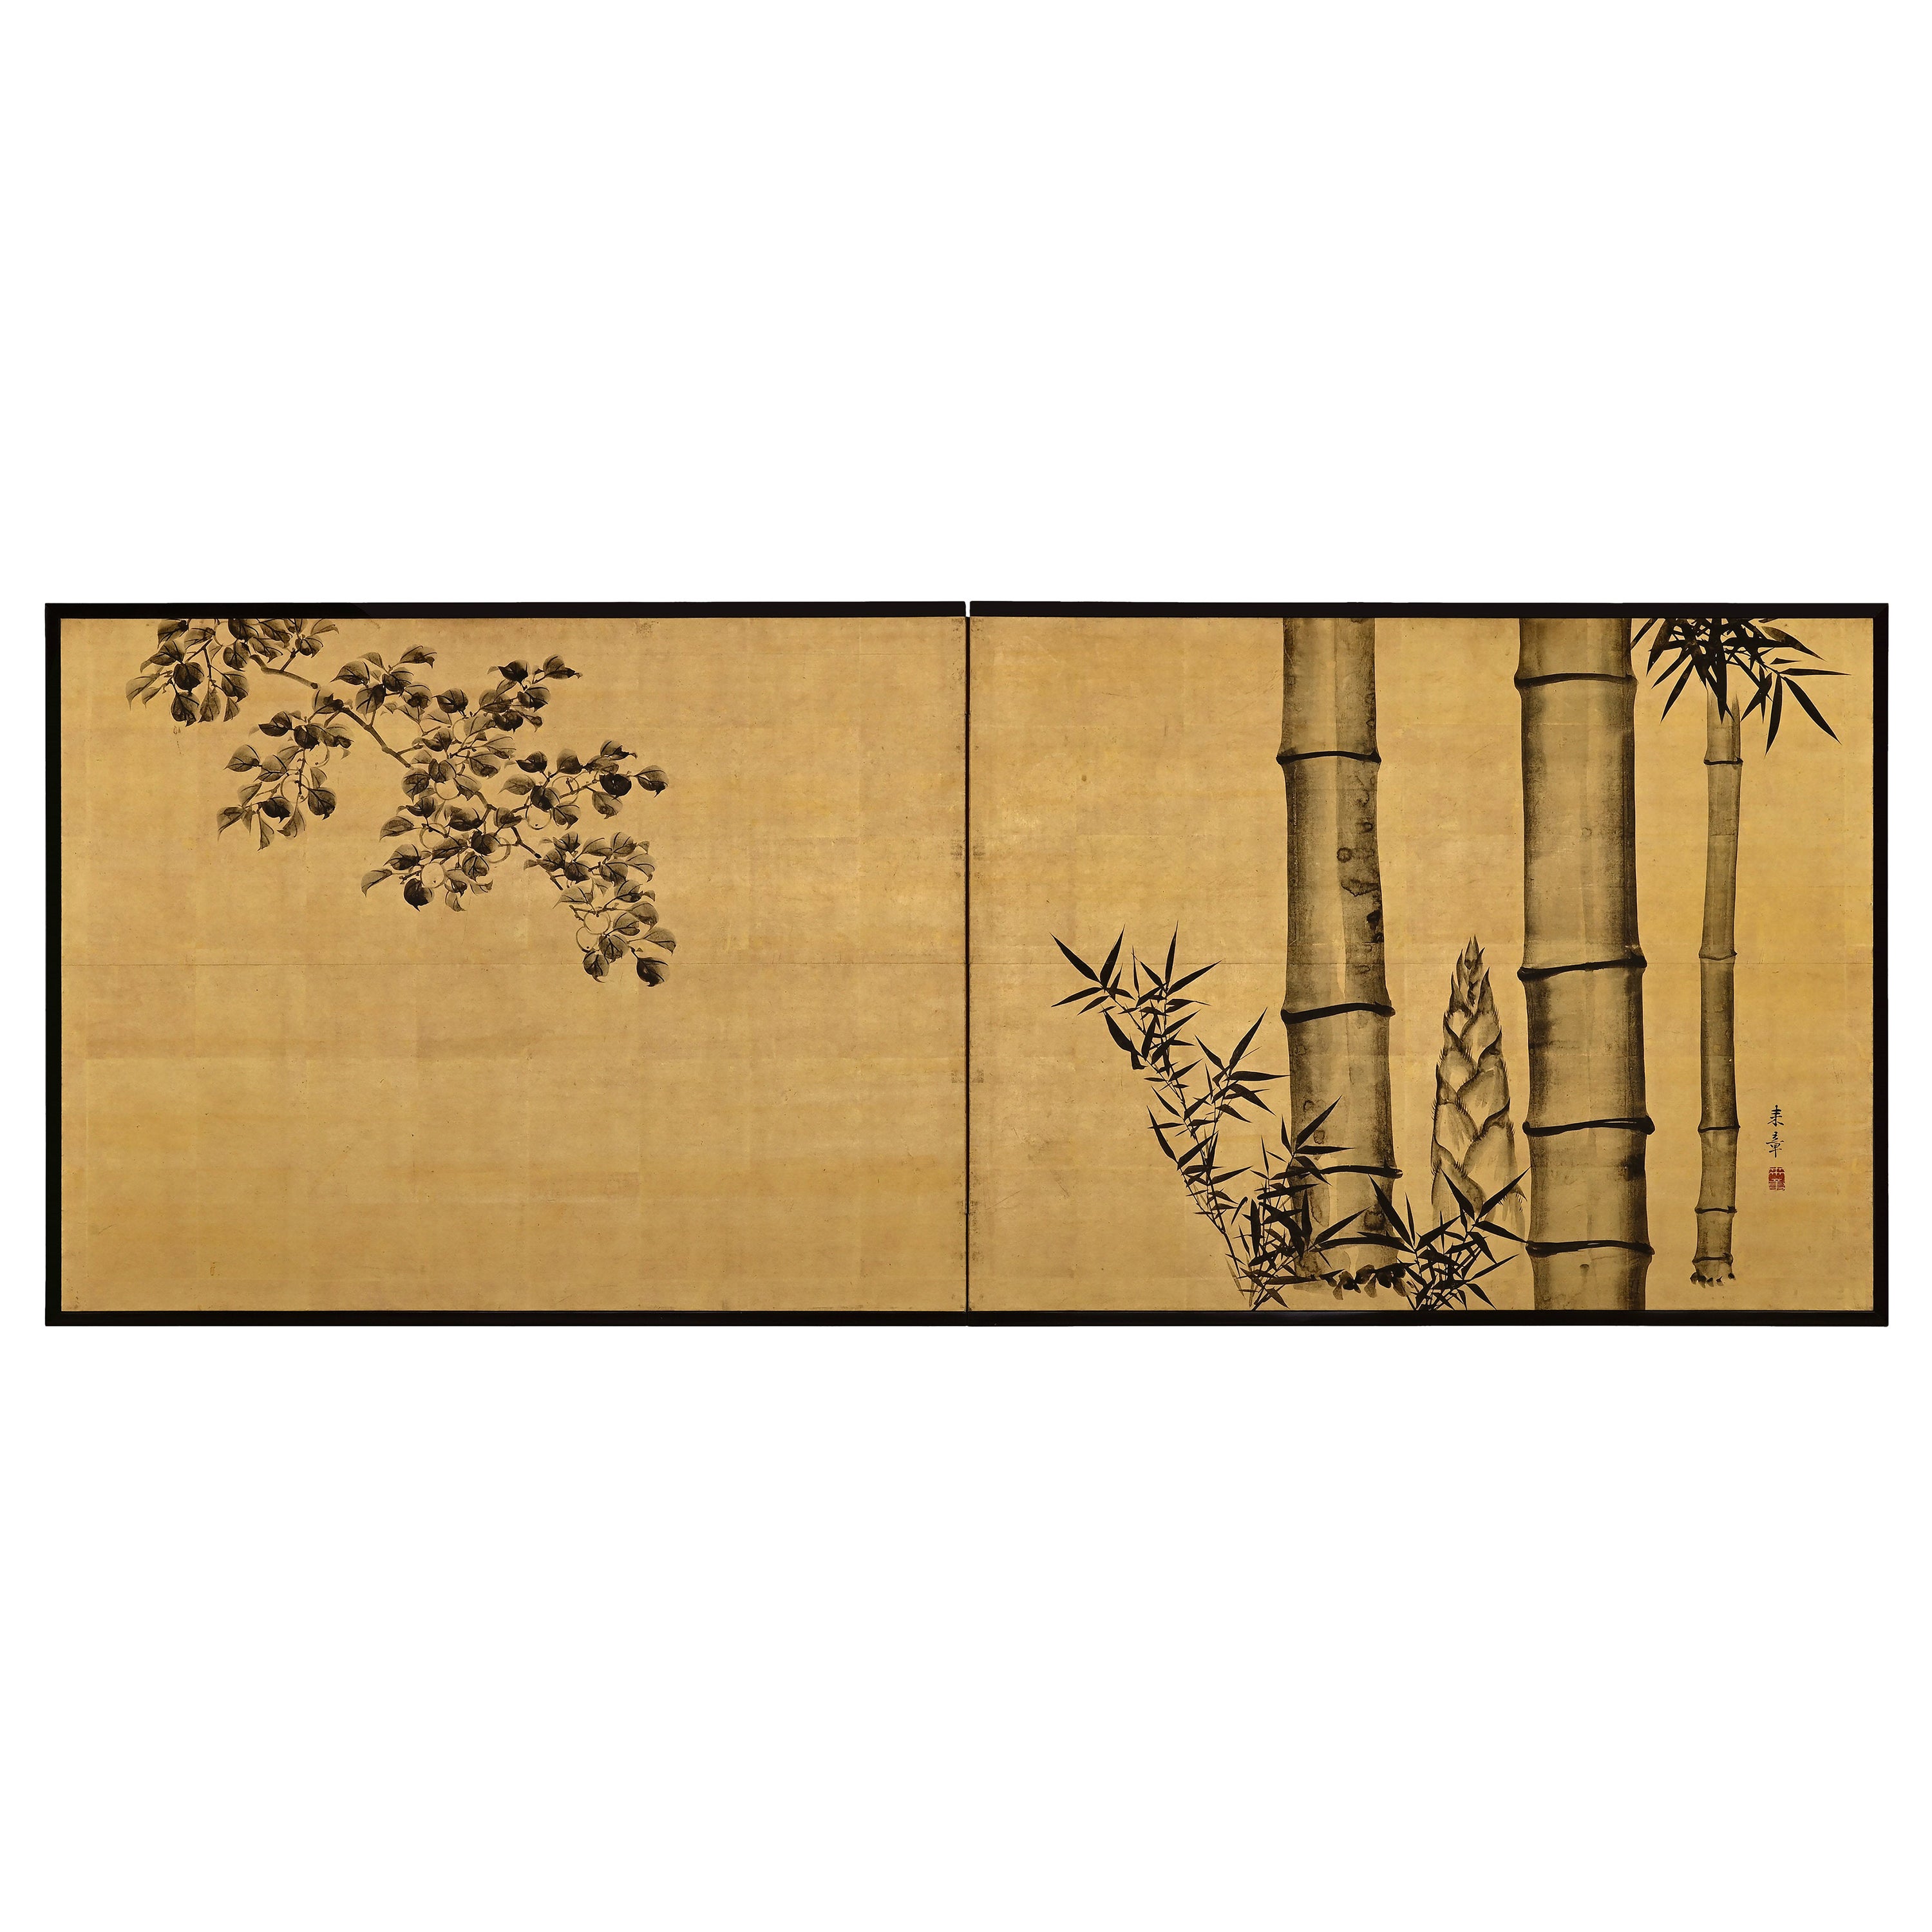 19th Century Japanese Screen for Tea-Ceremony, Ink Bamboo and Plum on Gold Leaf For Sale